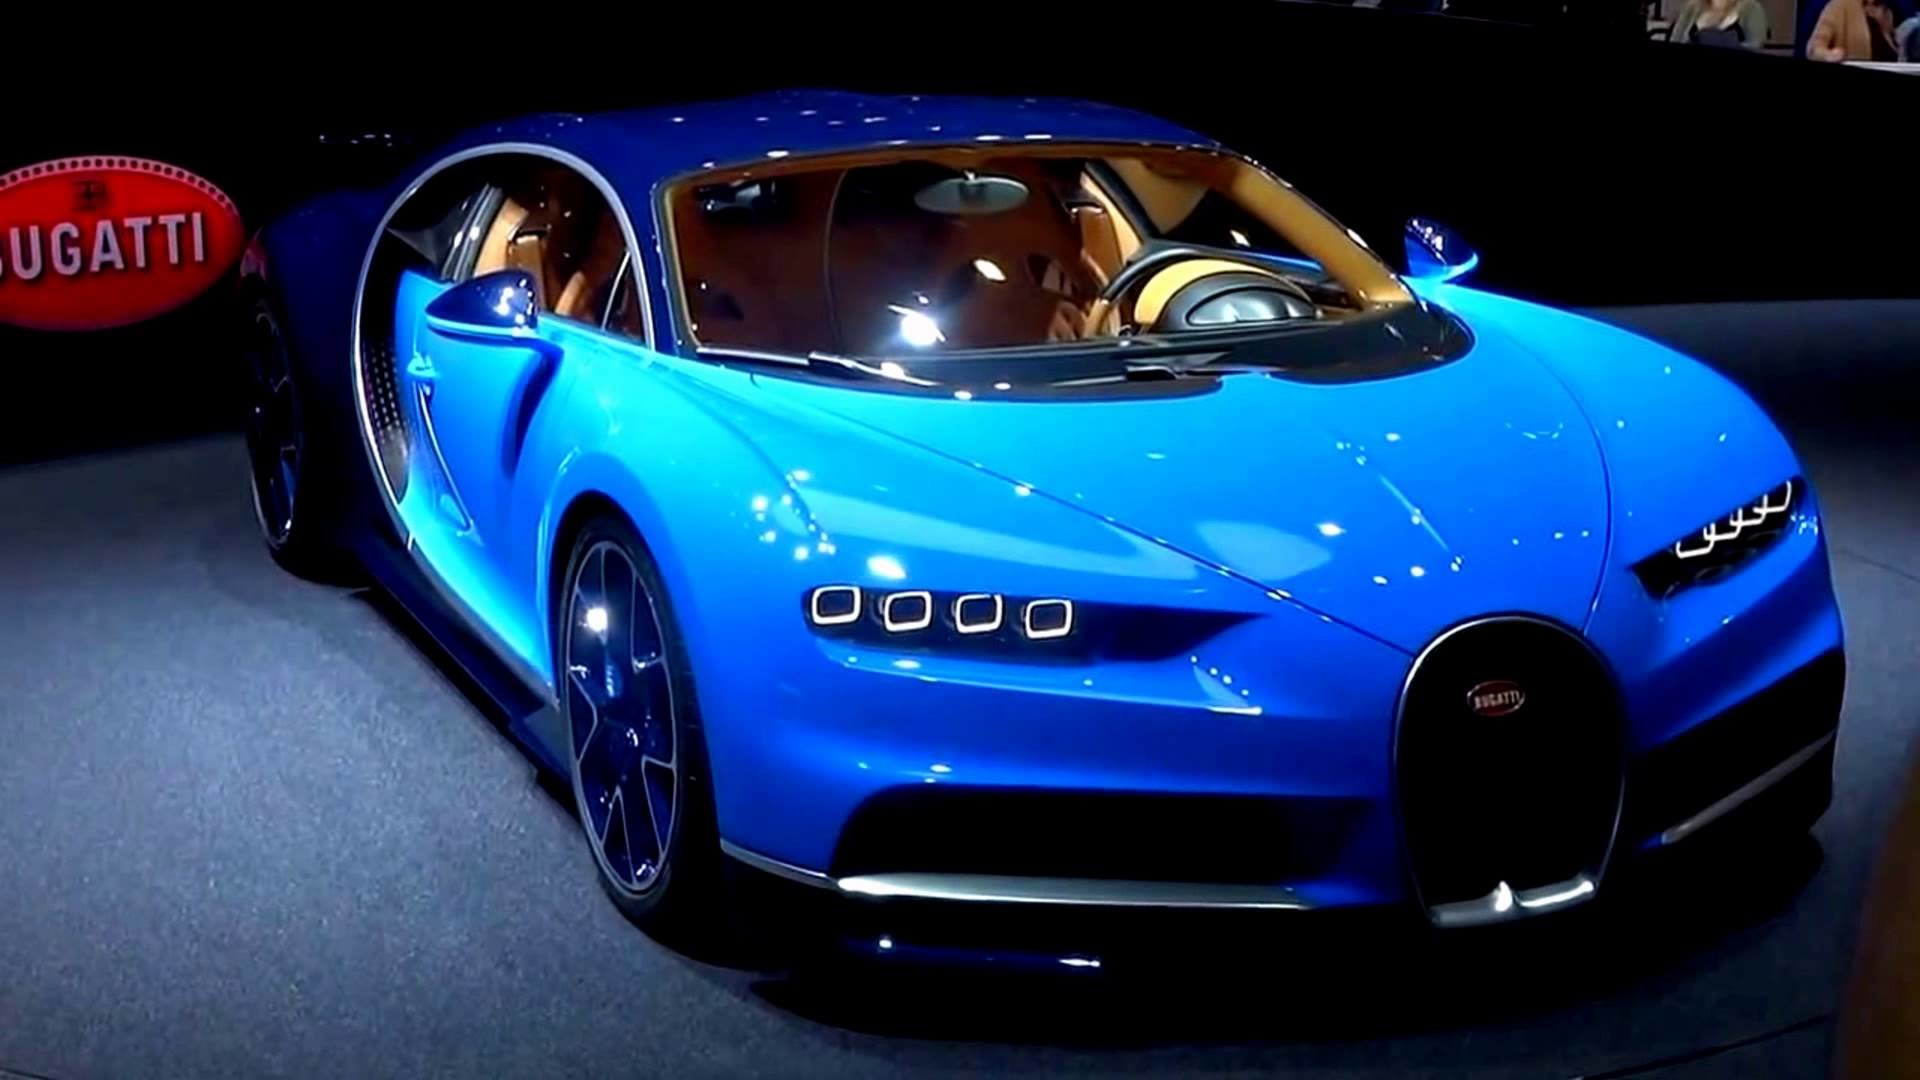 1920x1080 The Bugatti Veyron was a grand accomplishment of designing, a supercar  whose execution was so brilliant, Top Gear moderator James May contrasted  it with ...